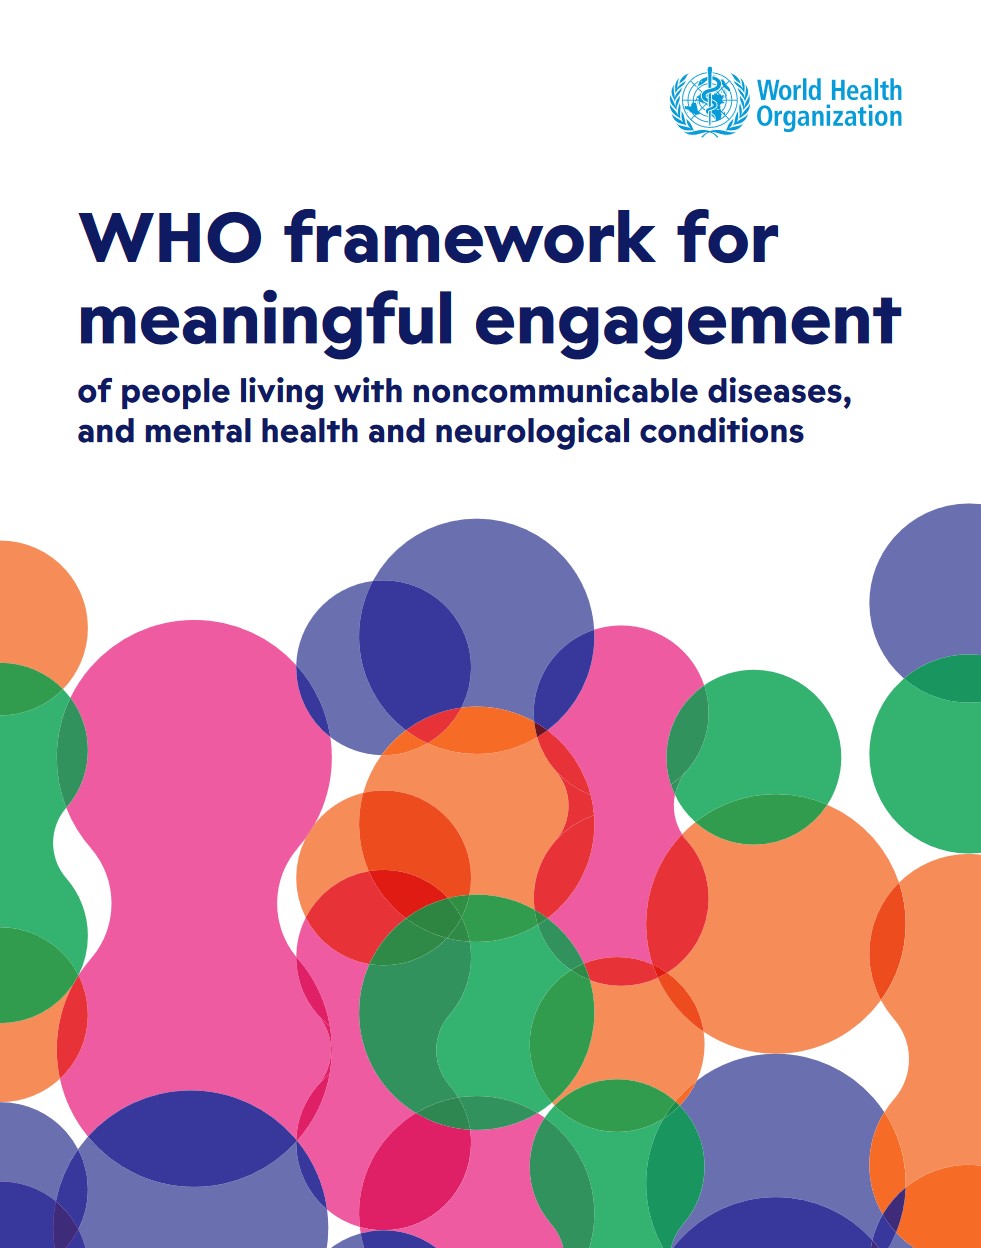  WHO framework for meaningful engagement of people living with noncommunicable diseases, and mental health and neurological conditions